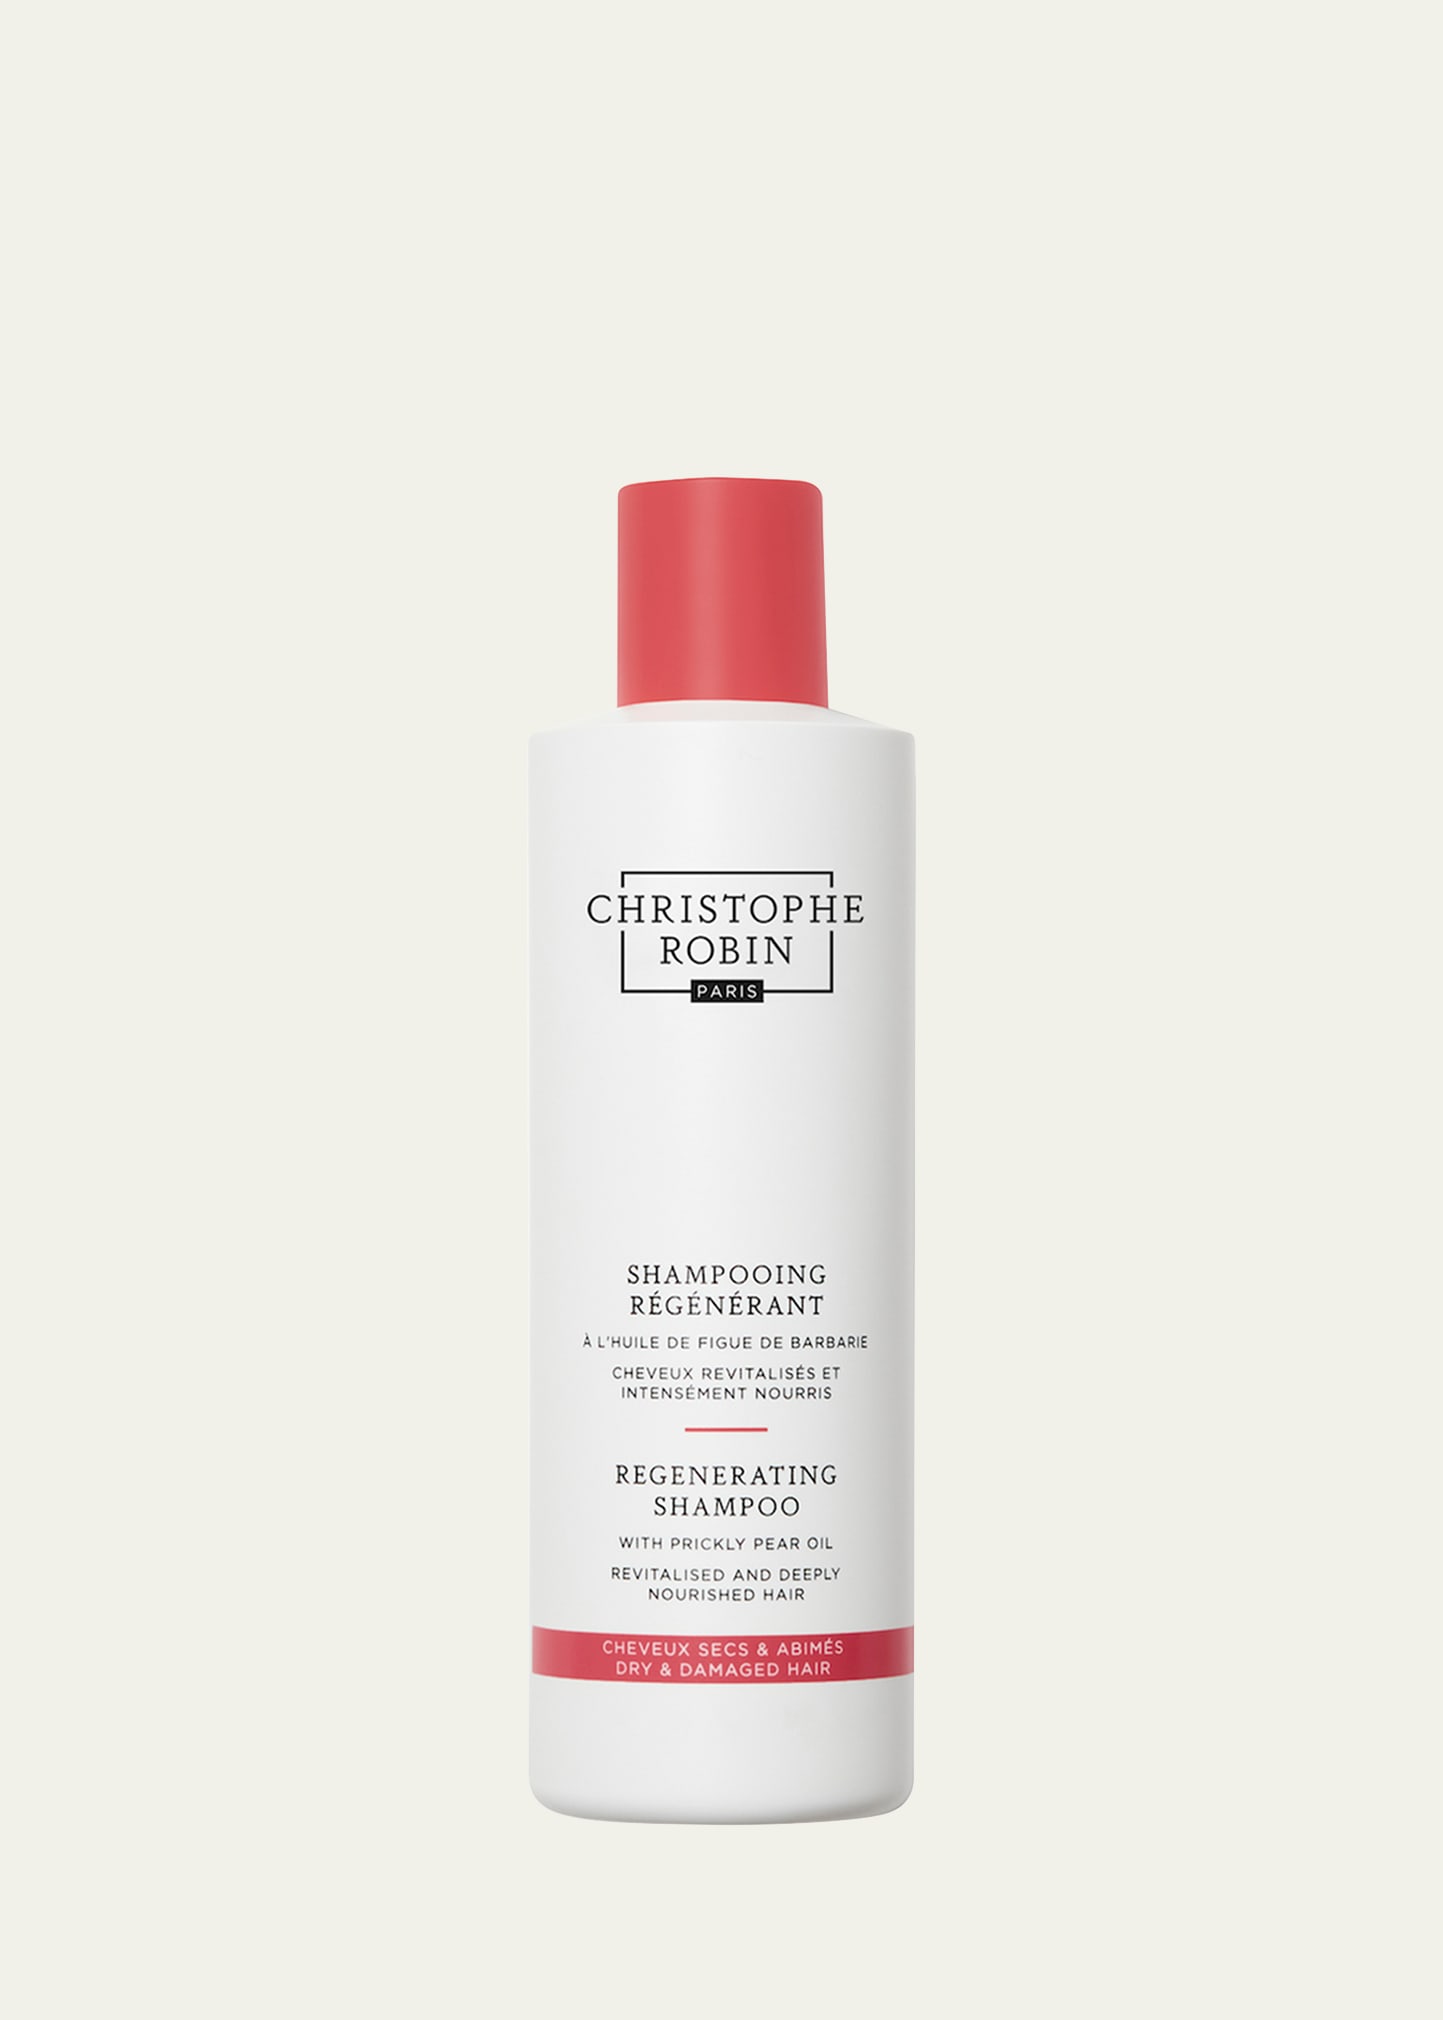 Christophe Robin 8.4 oz. Regenerating Shampoo with Prickly Pear Oil